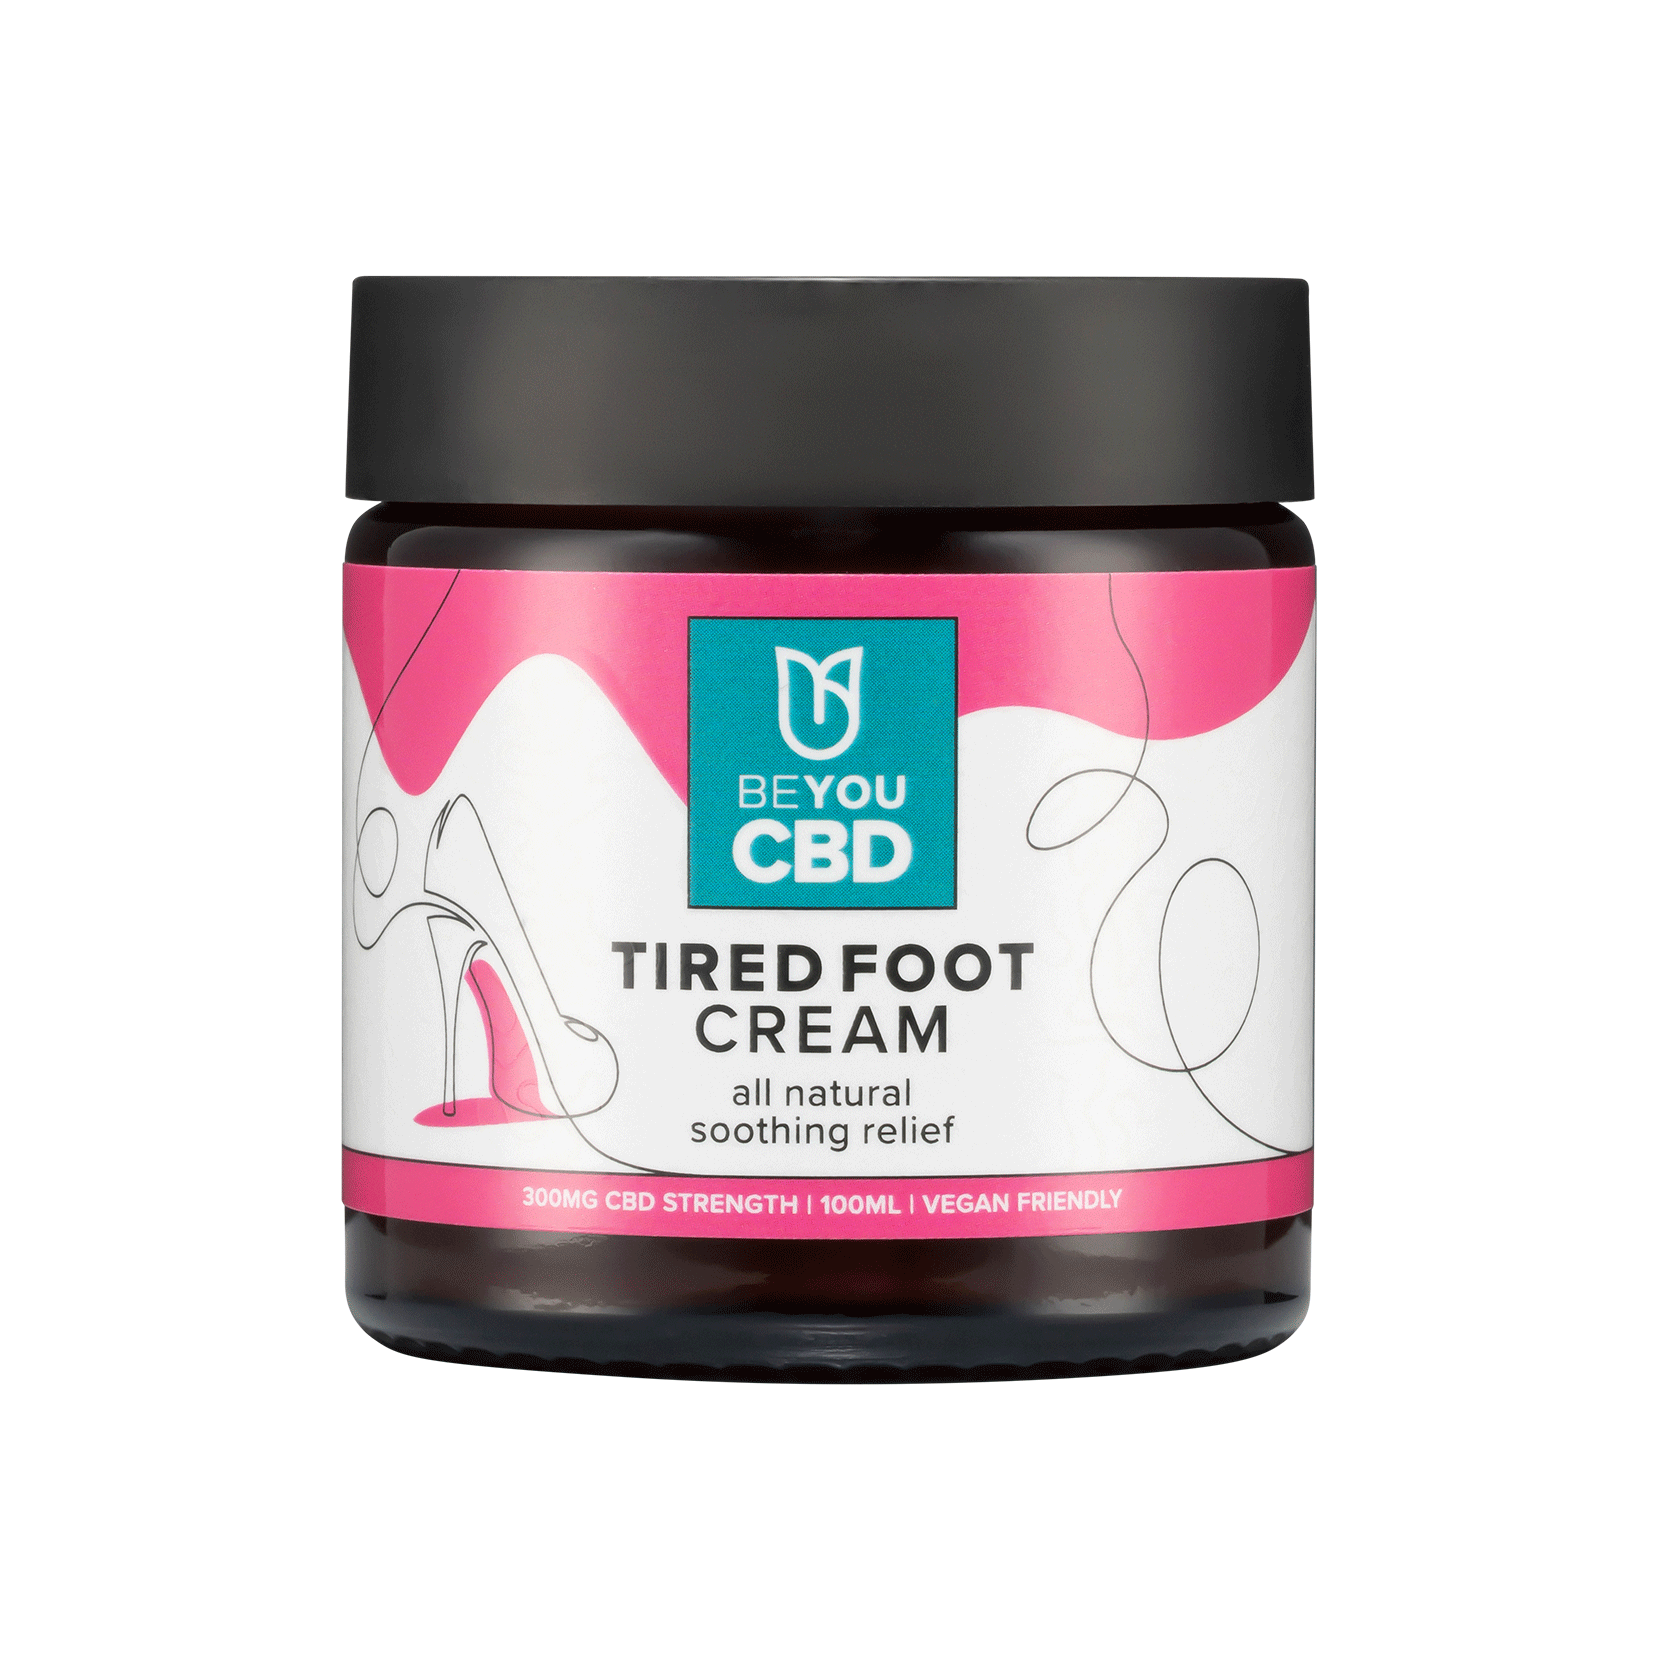 CBD cream for foot pain after wearing high heels giving you the CBD benefits of a cream